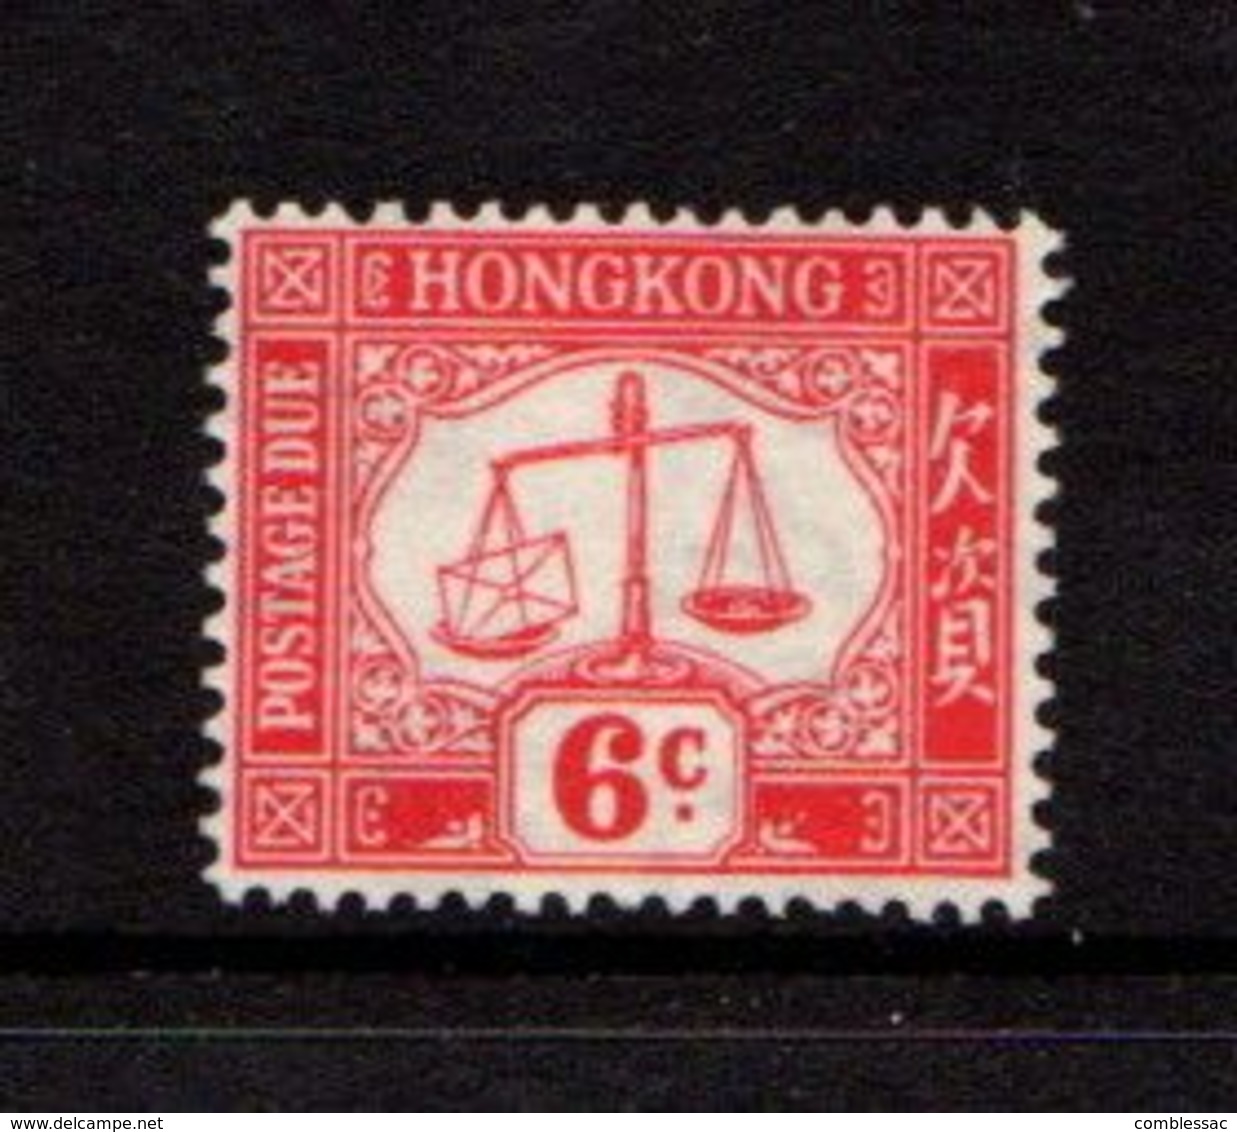 HONG  KONG    1923    Postage  Due    2c  Red    MH - Postage Due